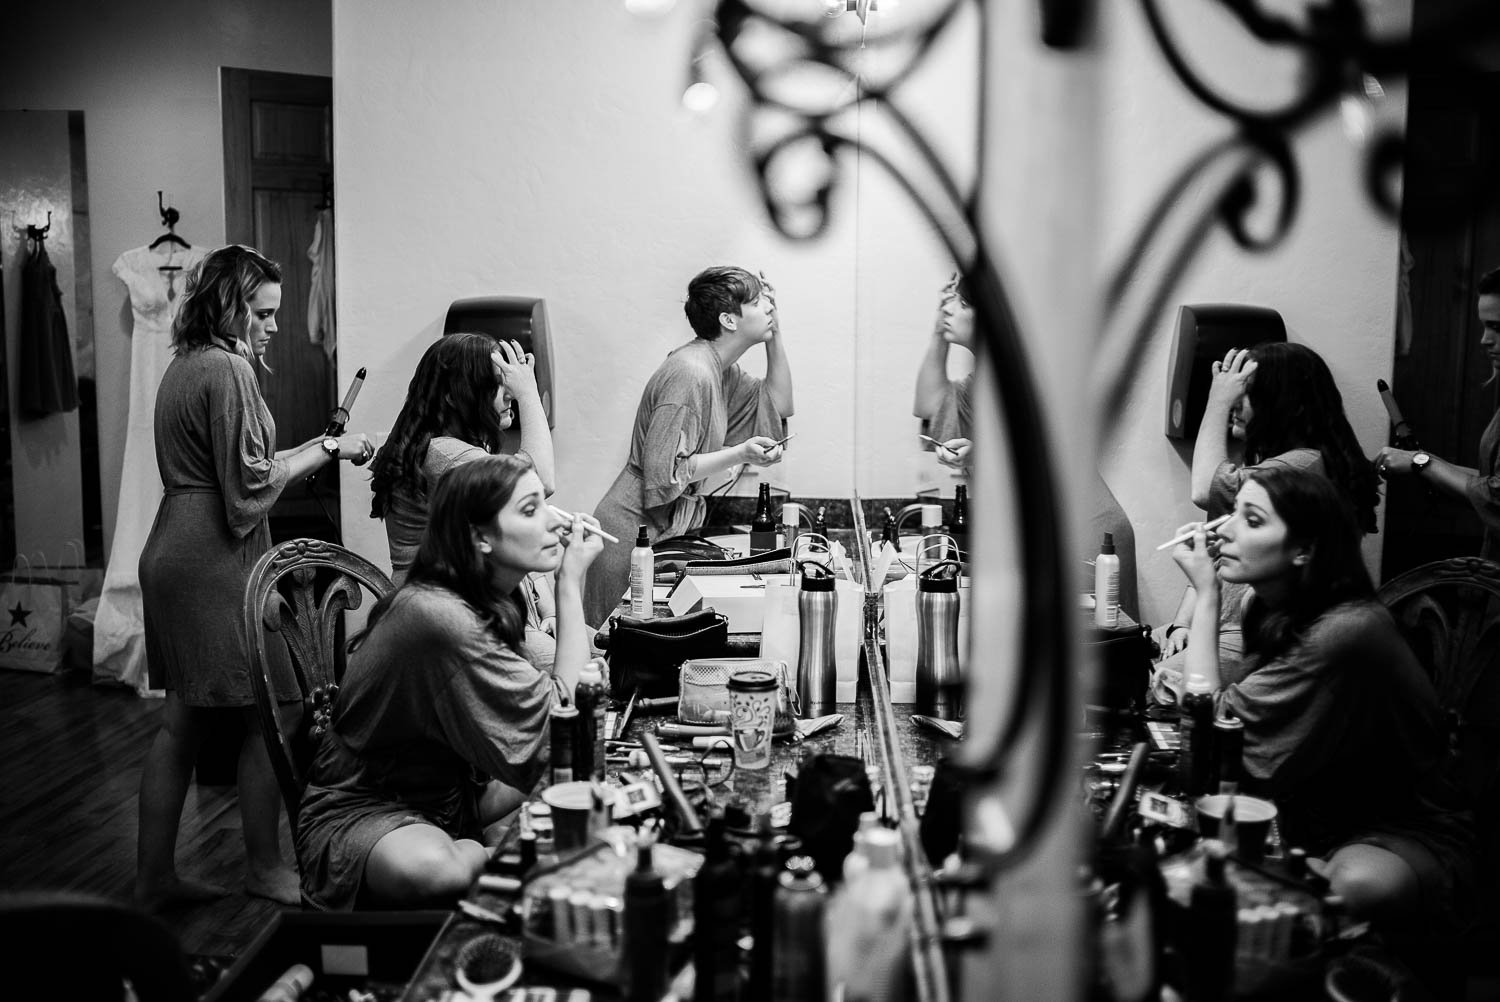 Bridesmaids shown getting ready in a mirror reflection Pecan Springs Houston Texas photo by Philip Thomas Photography